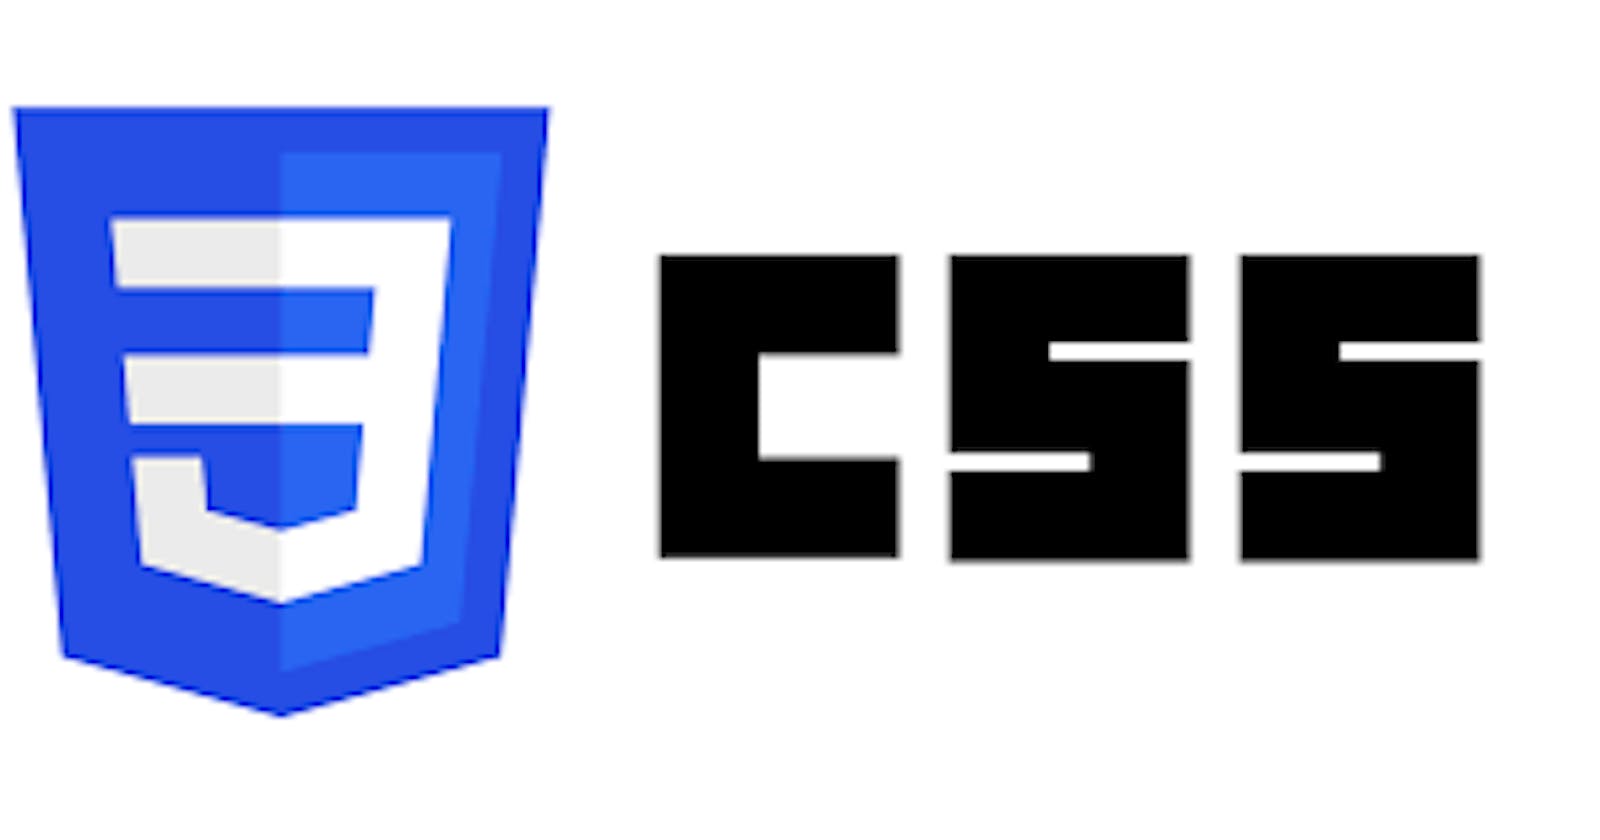 Positioning (CSS)